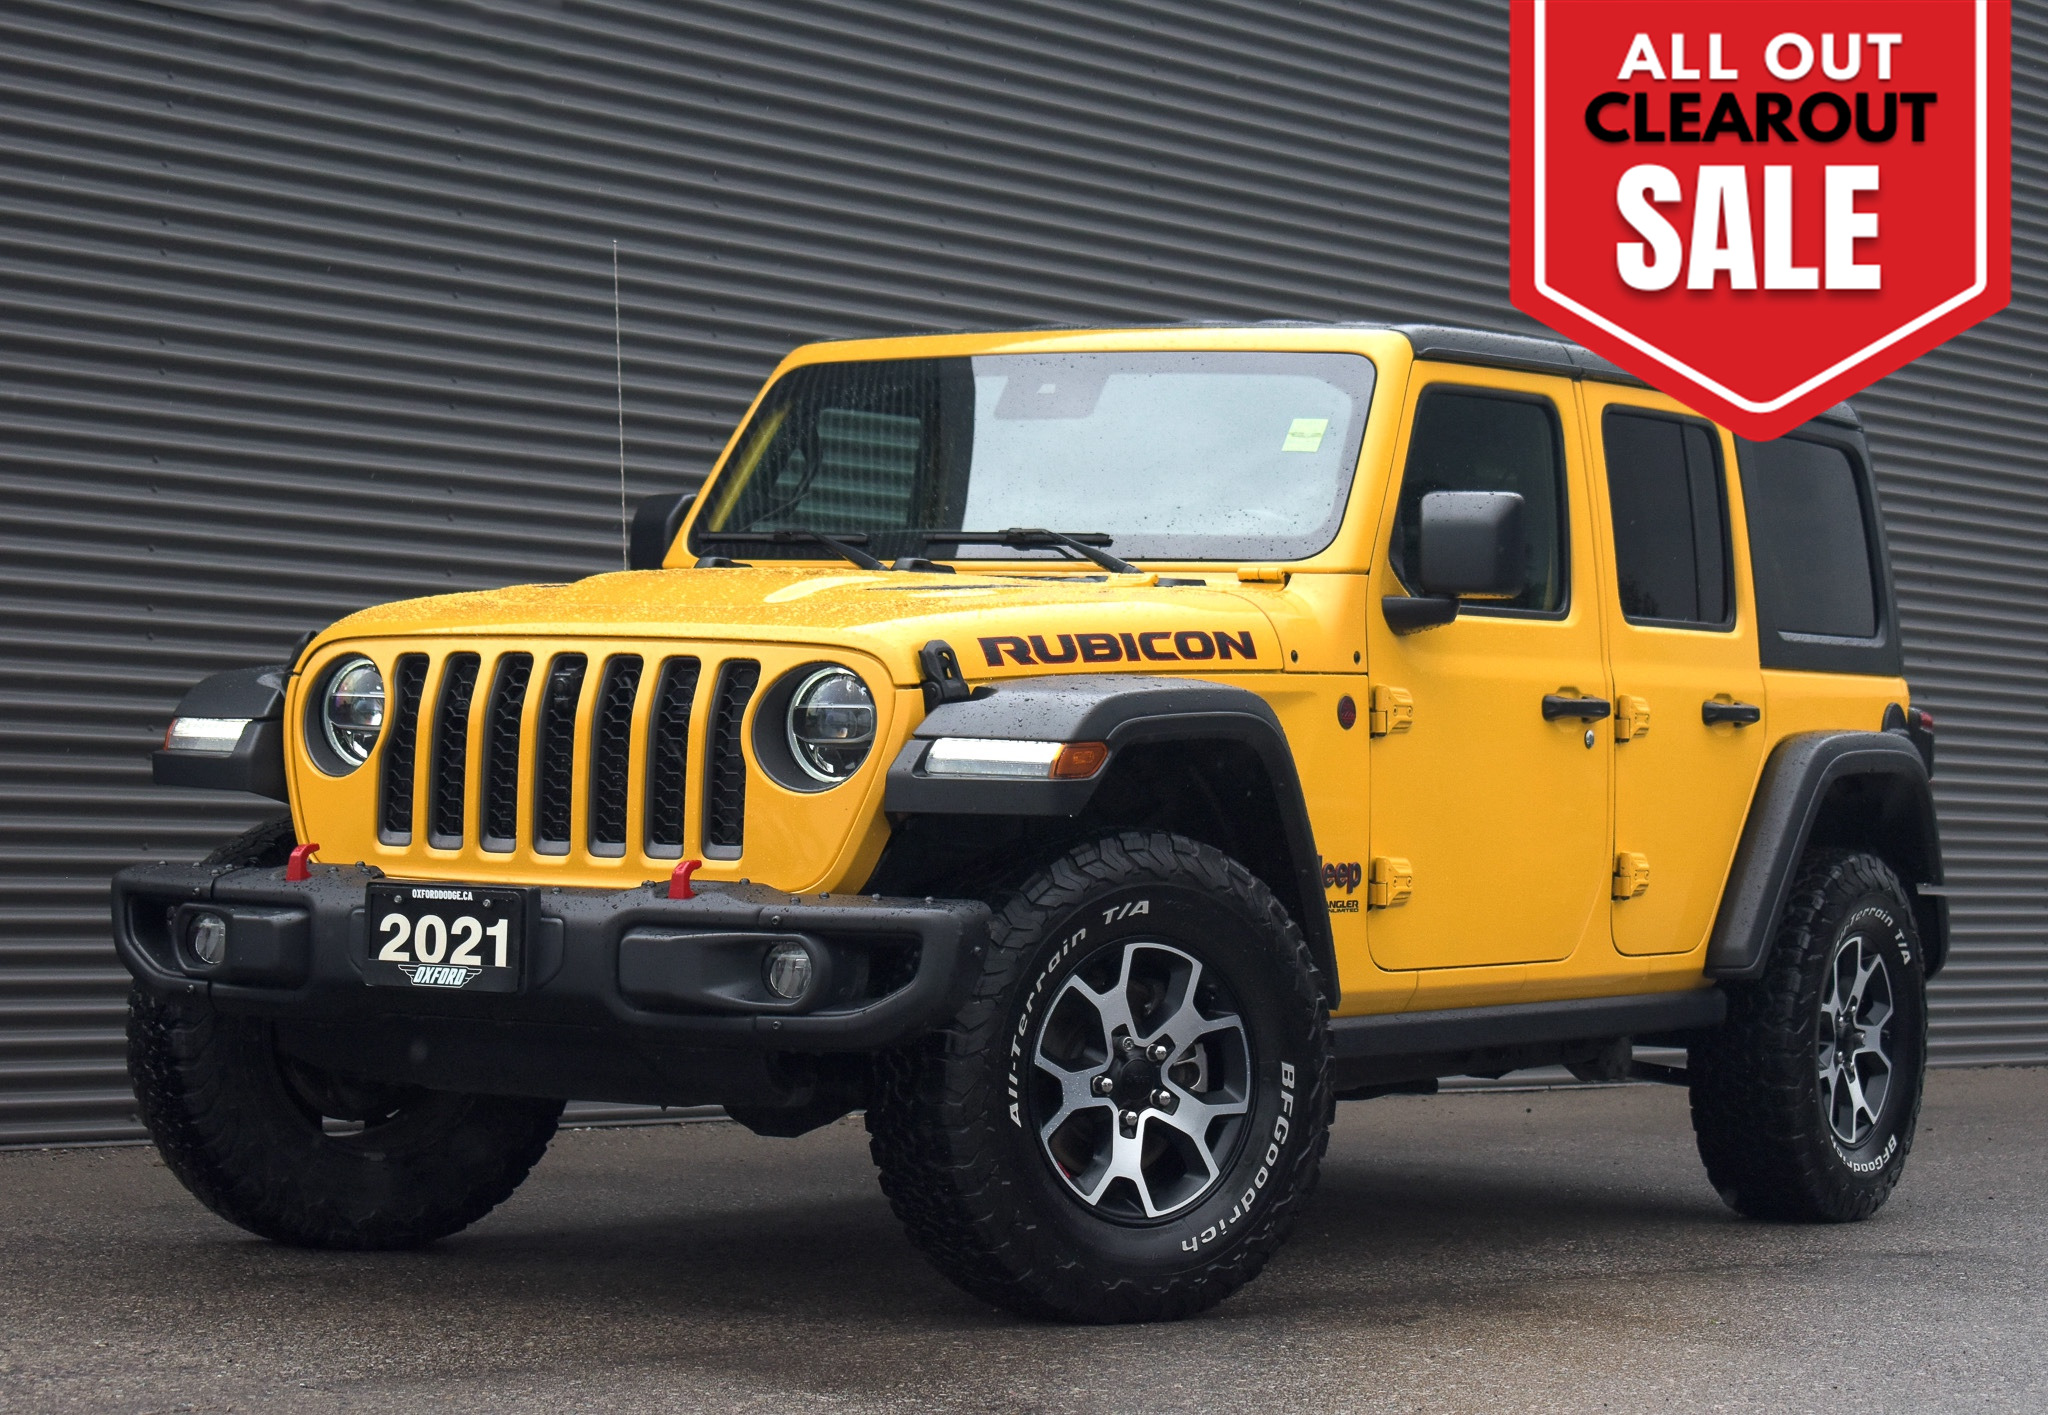 2021 Jeep WRANGLER UNLIMITED Rubicon Serviced Here At Oxford Dodge, Hard Top